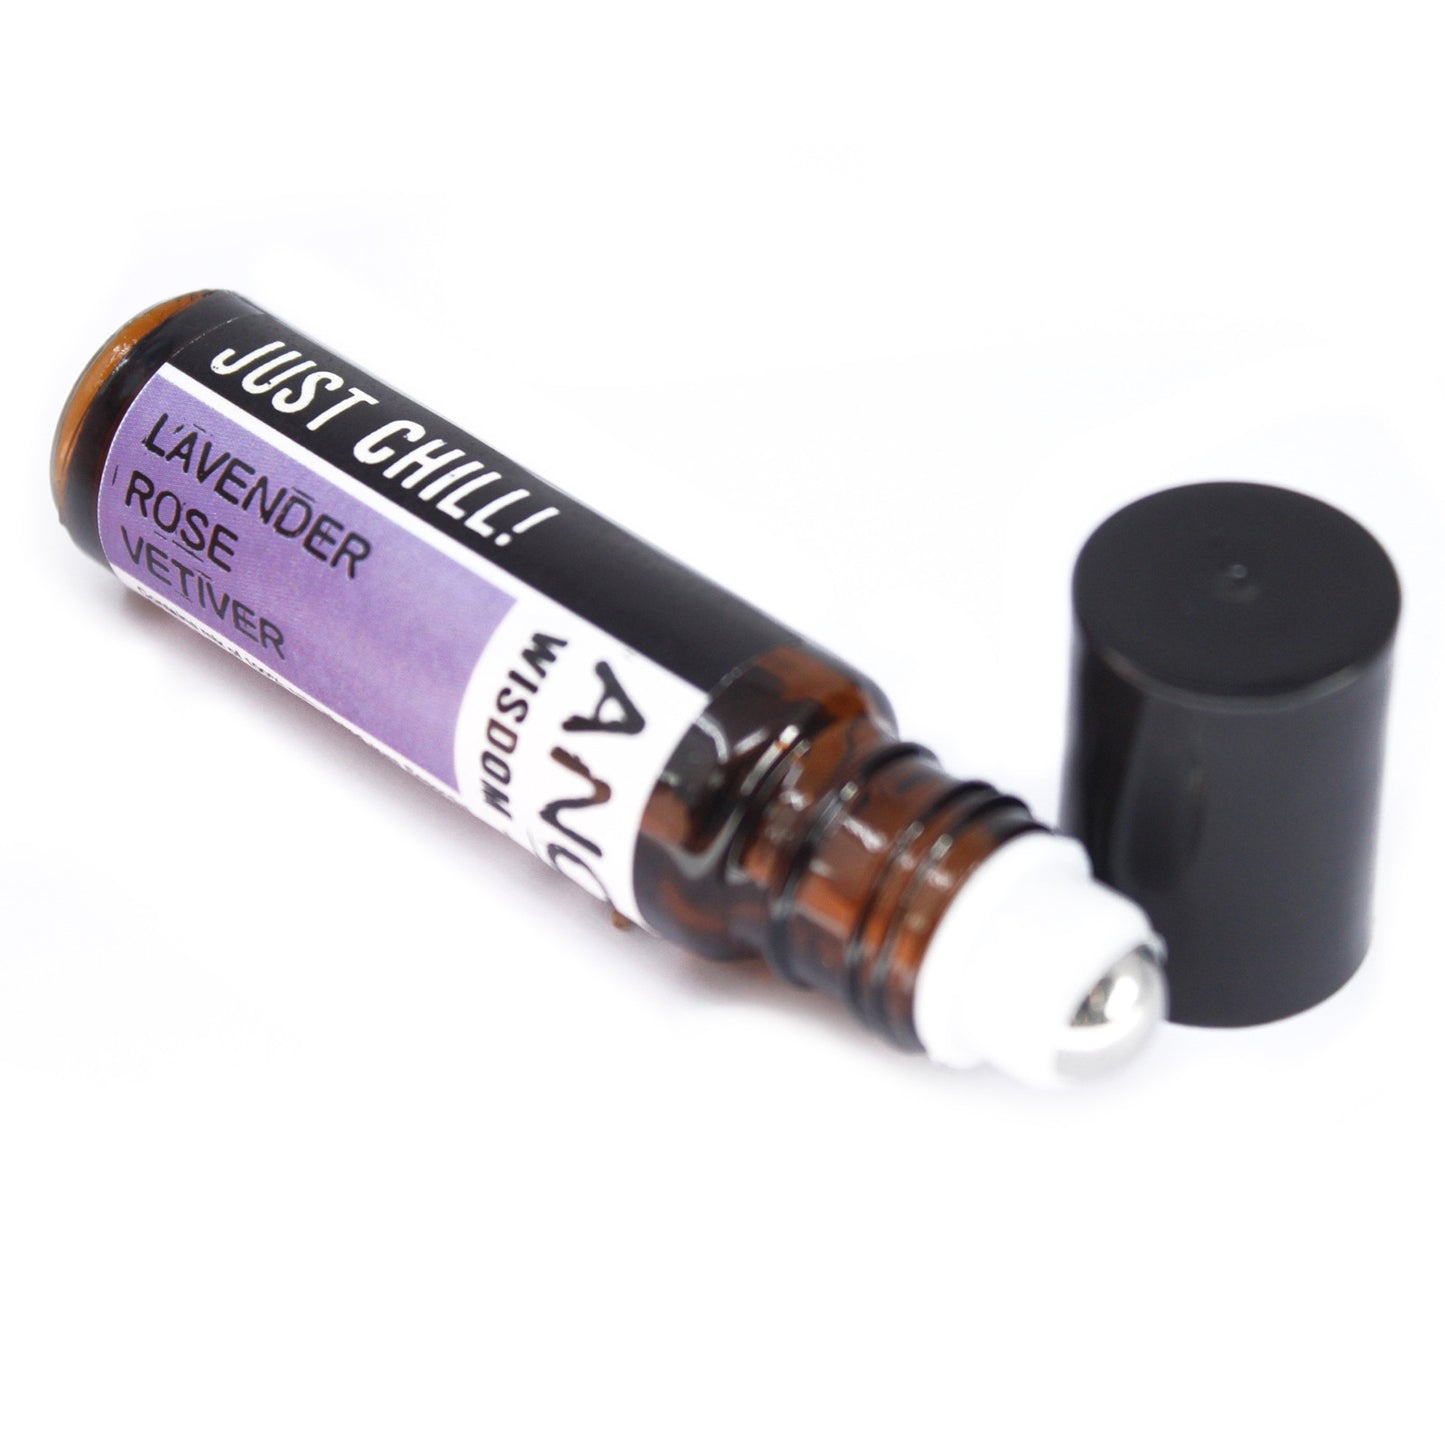 Just Chill ! - 10ml Roll On Essential Oil Blend